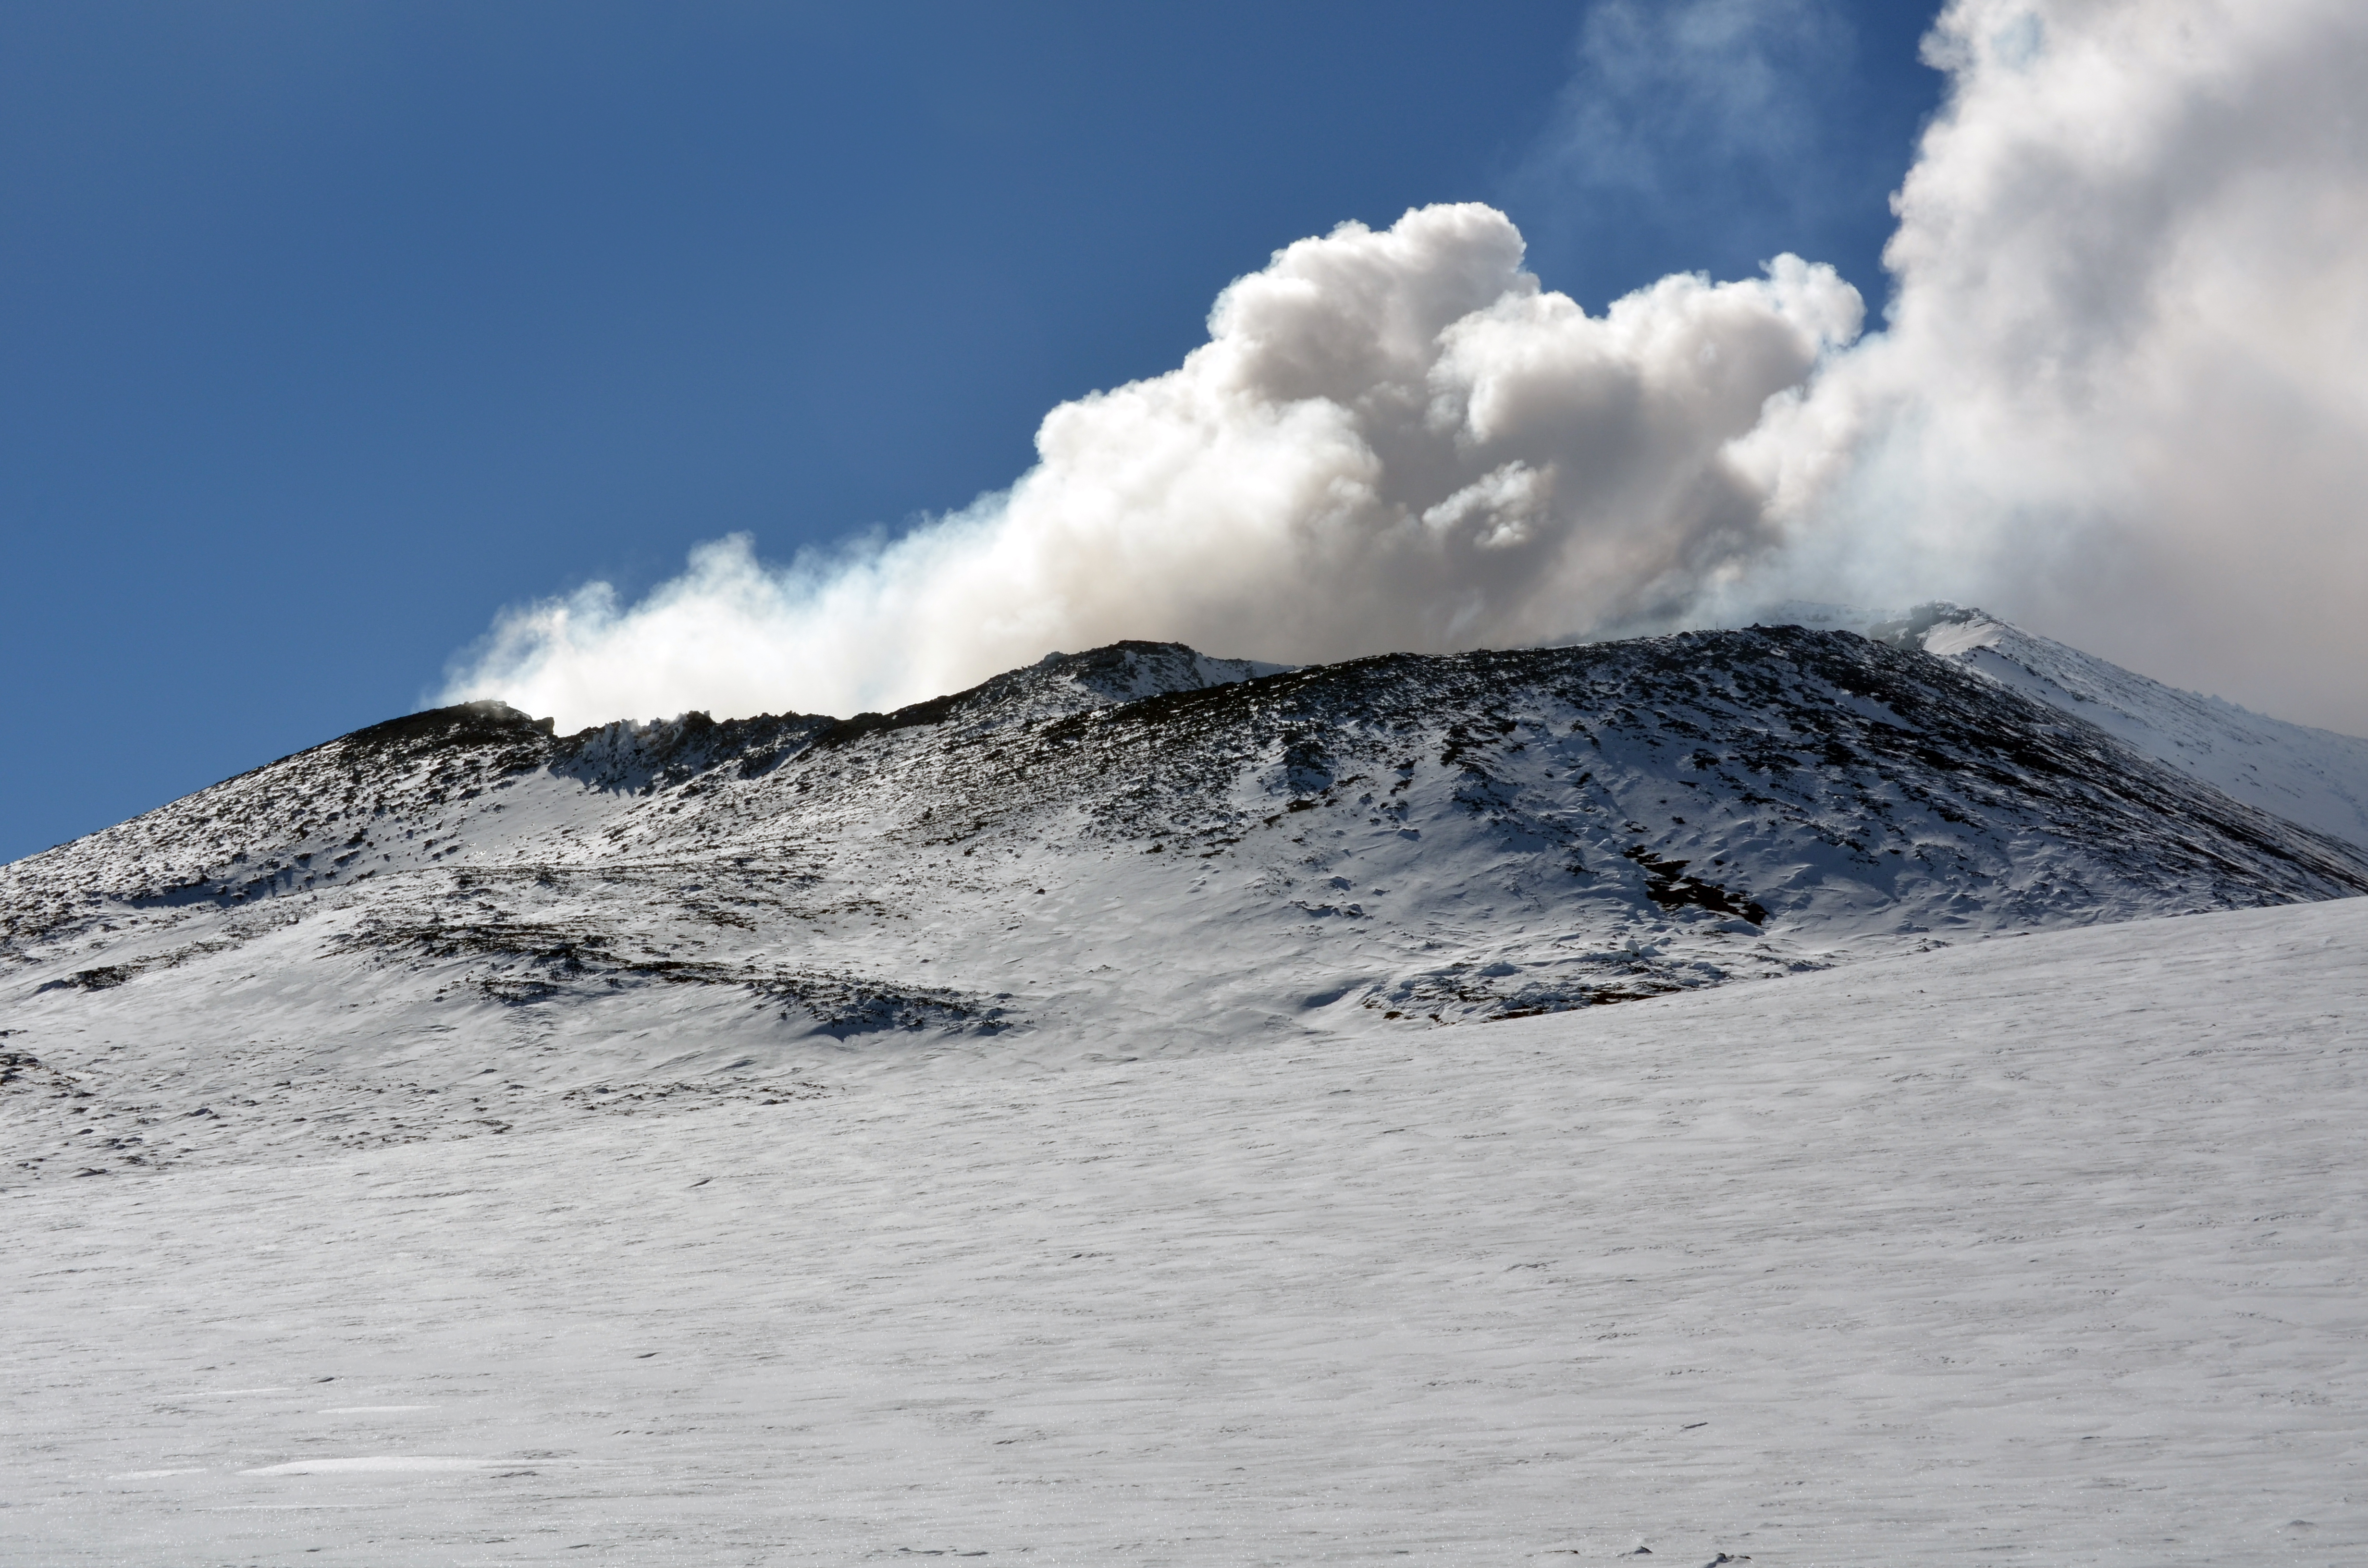 Smoke rises from a volcanic crater.